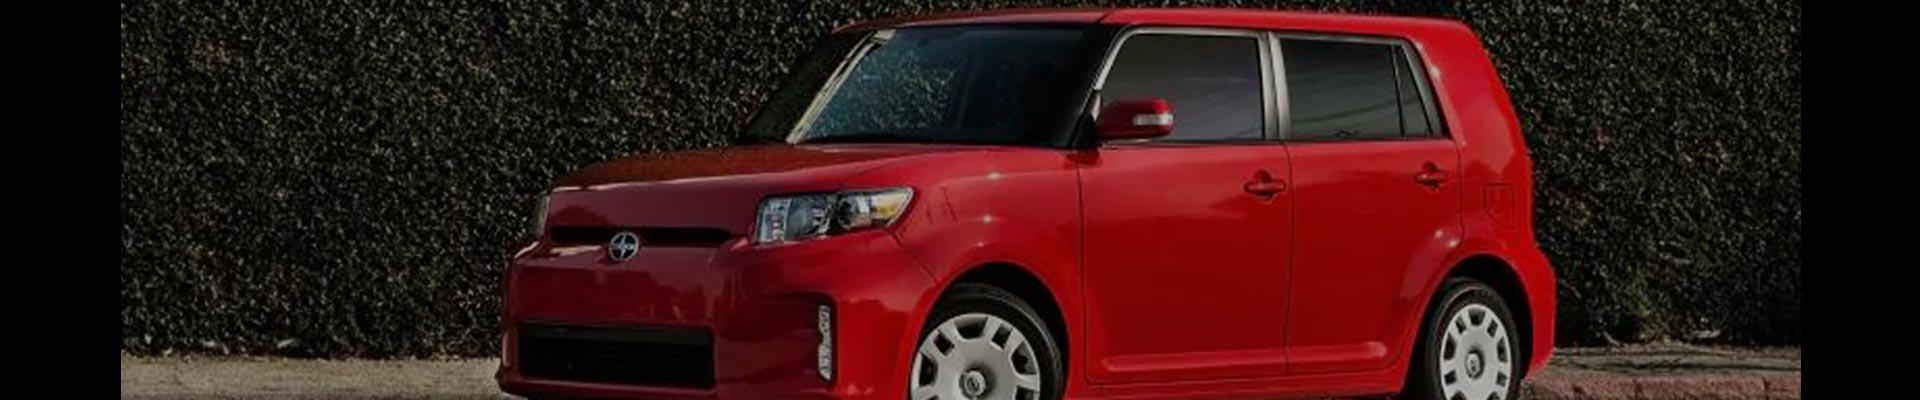 Shop Replacement and OEM 2008 Scion xB Parts with Discounted Price on the Net